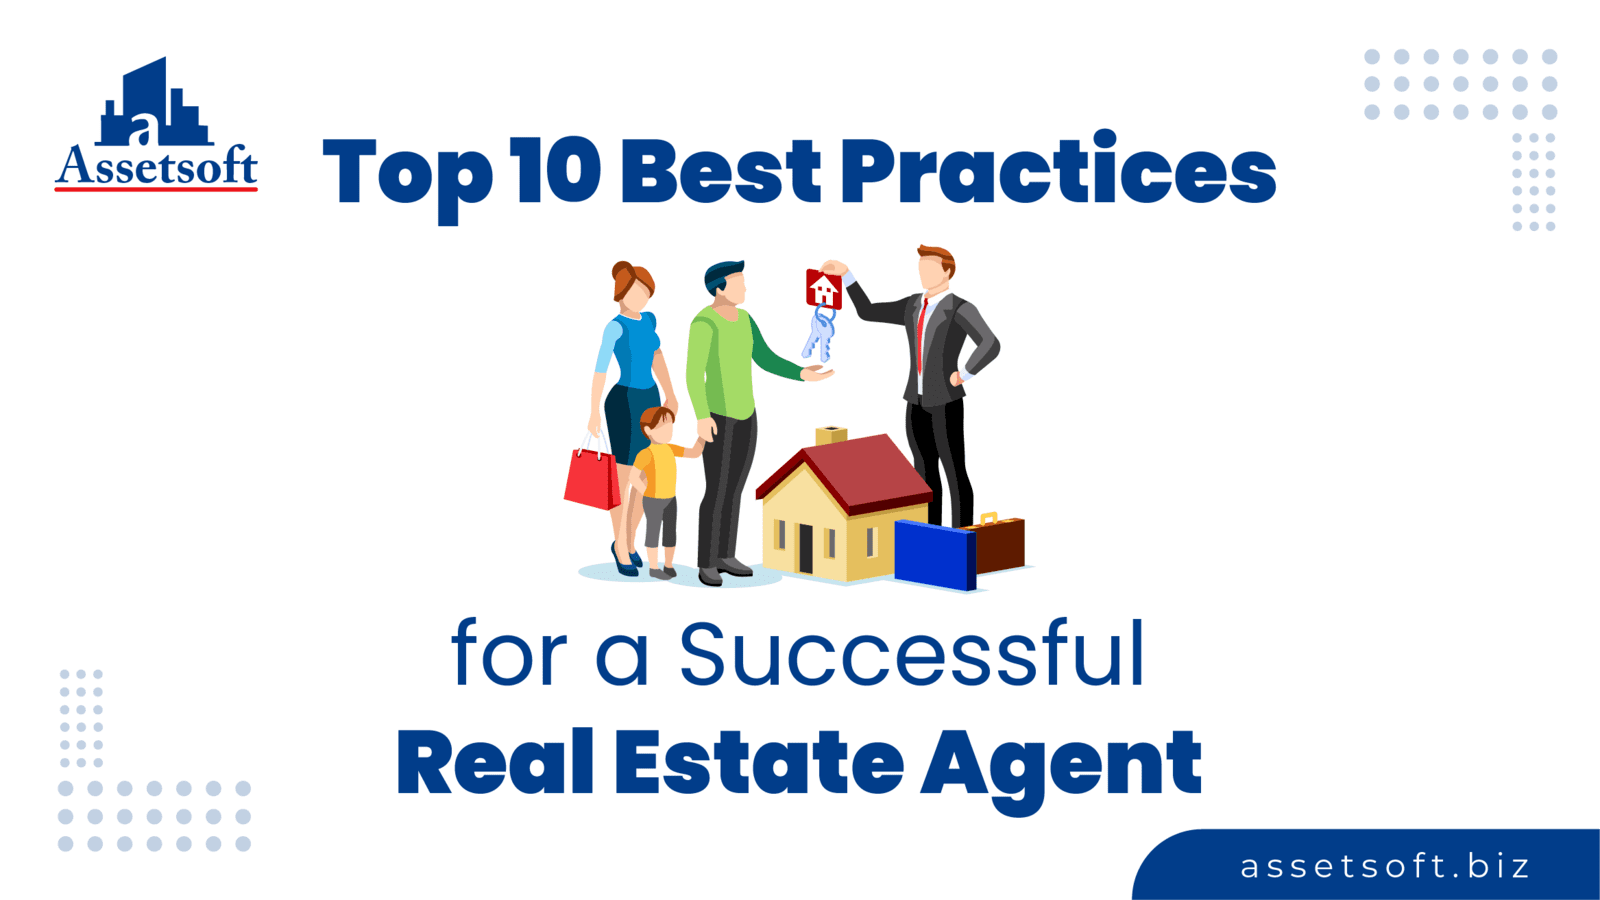 Top 10 Best Practices for a Successful Real Estate Agent 